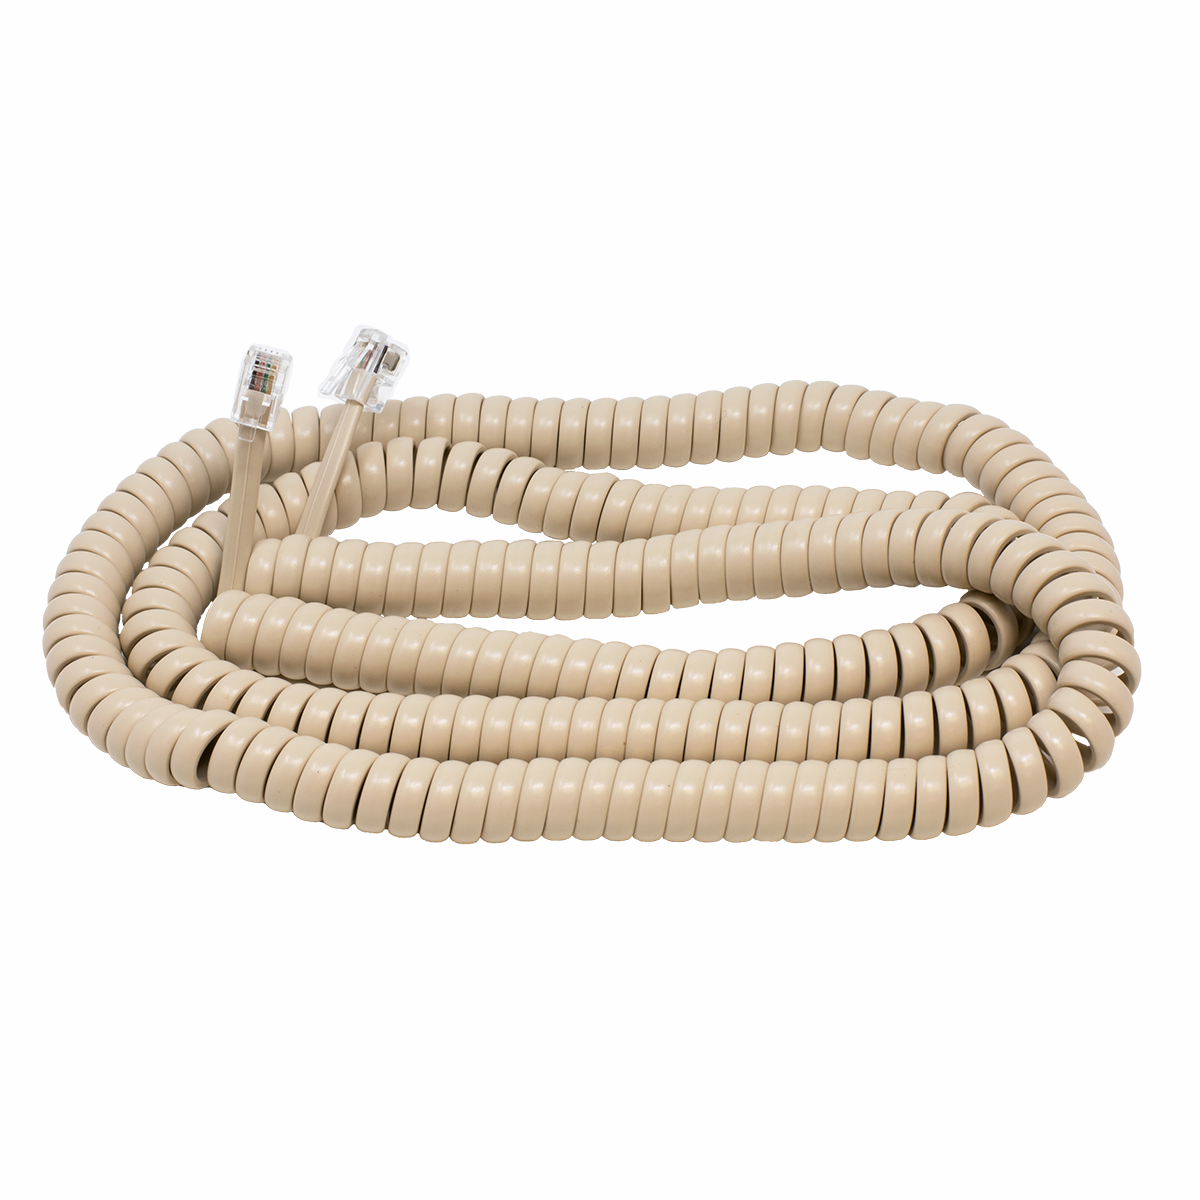 25' Ivory Coiled Handset Cord